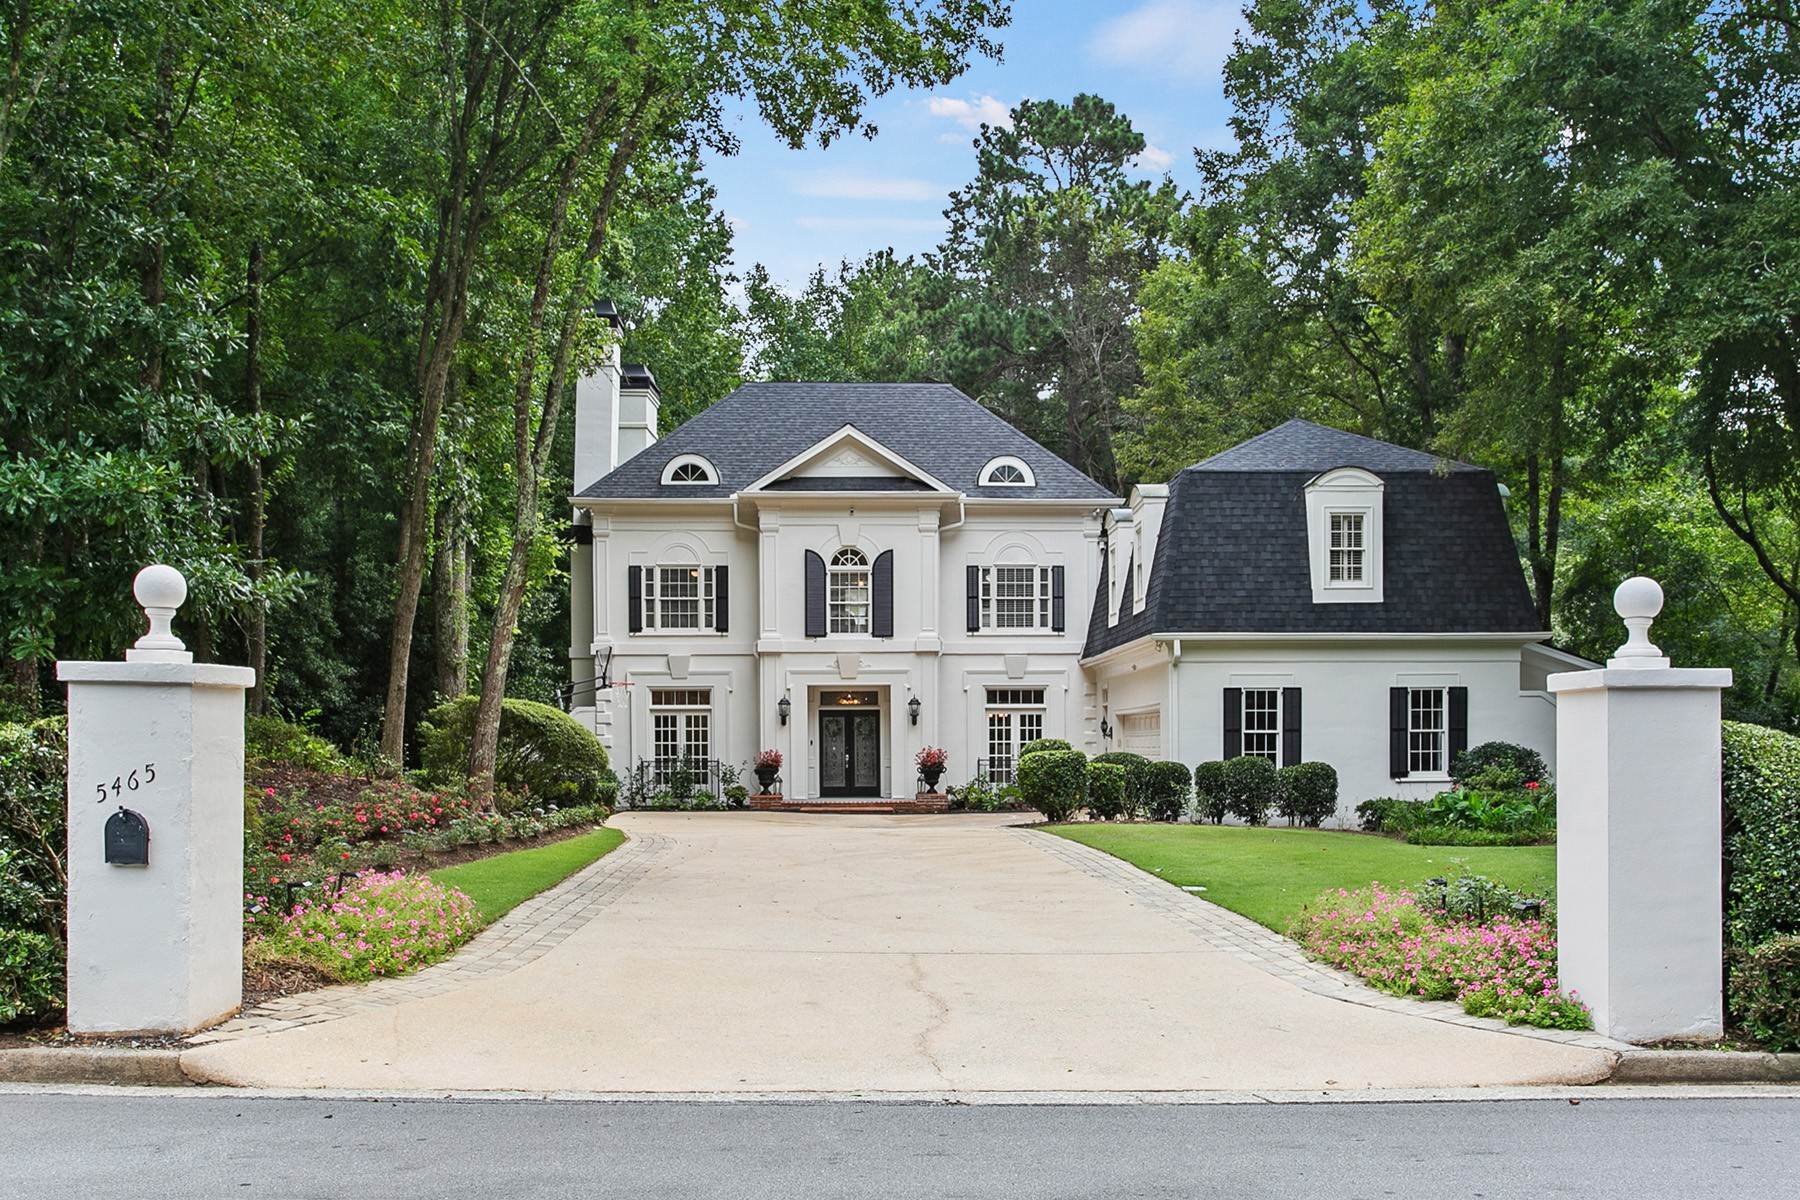 Single Family Homes for Sale at European Masterpiece with Stunning Pool and Gardens in Johns Creek 5465 Chelsen Wood Drive Johns Creek, Georgia 30097 United States